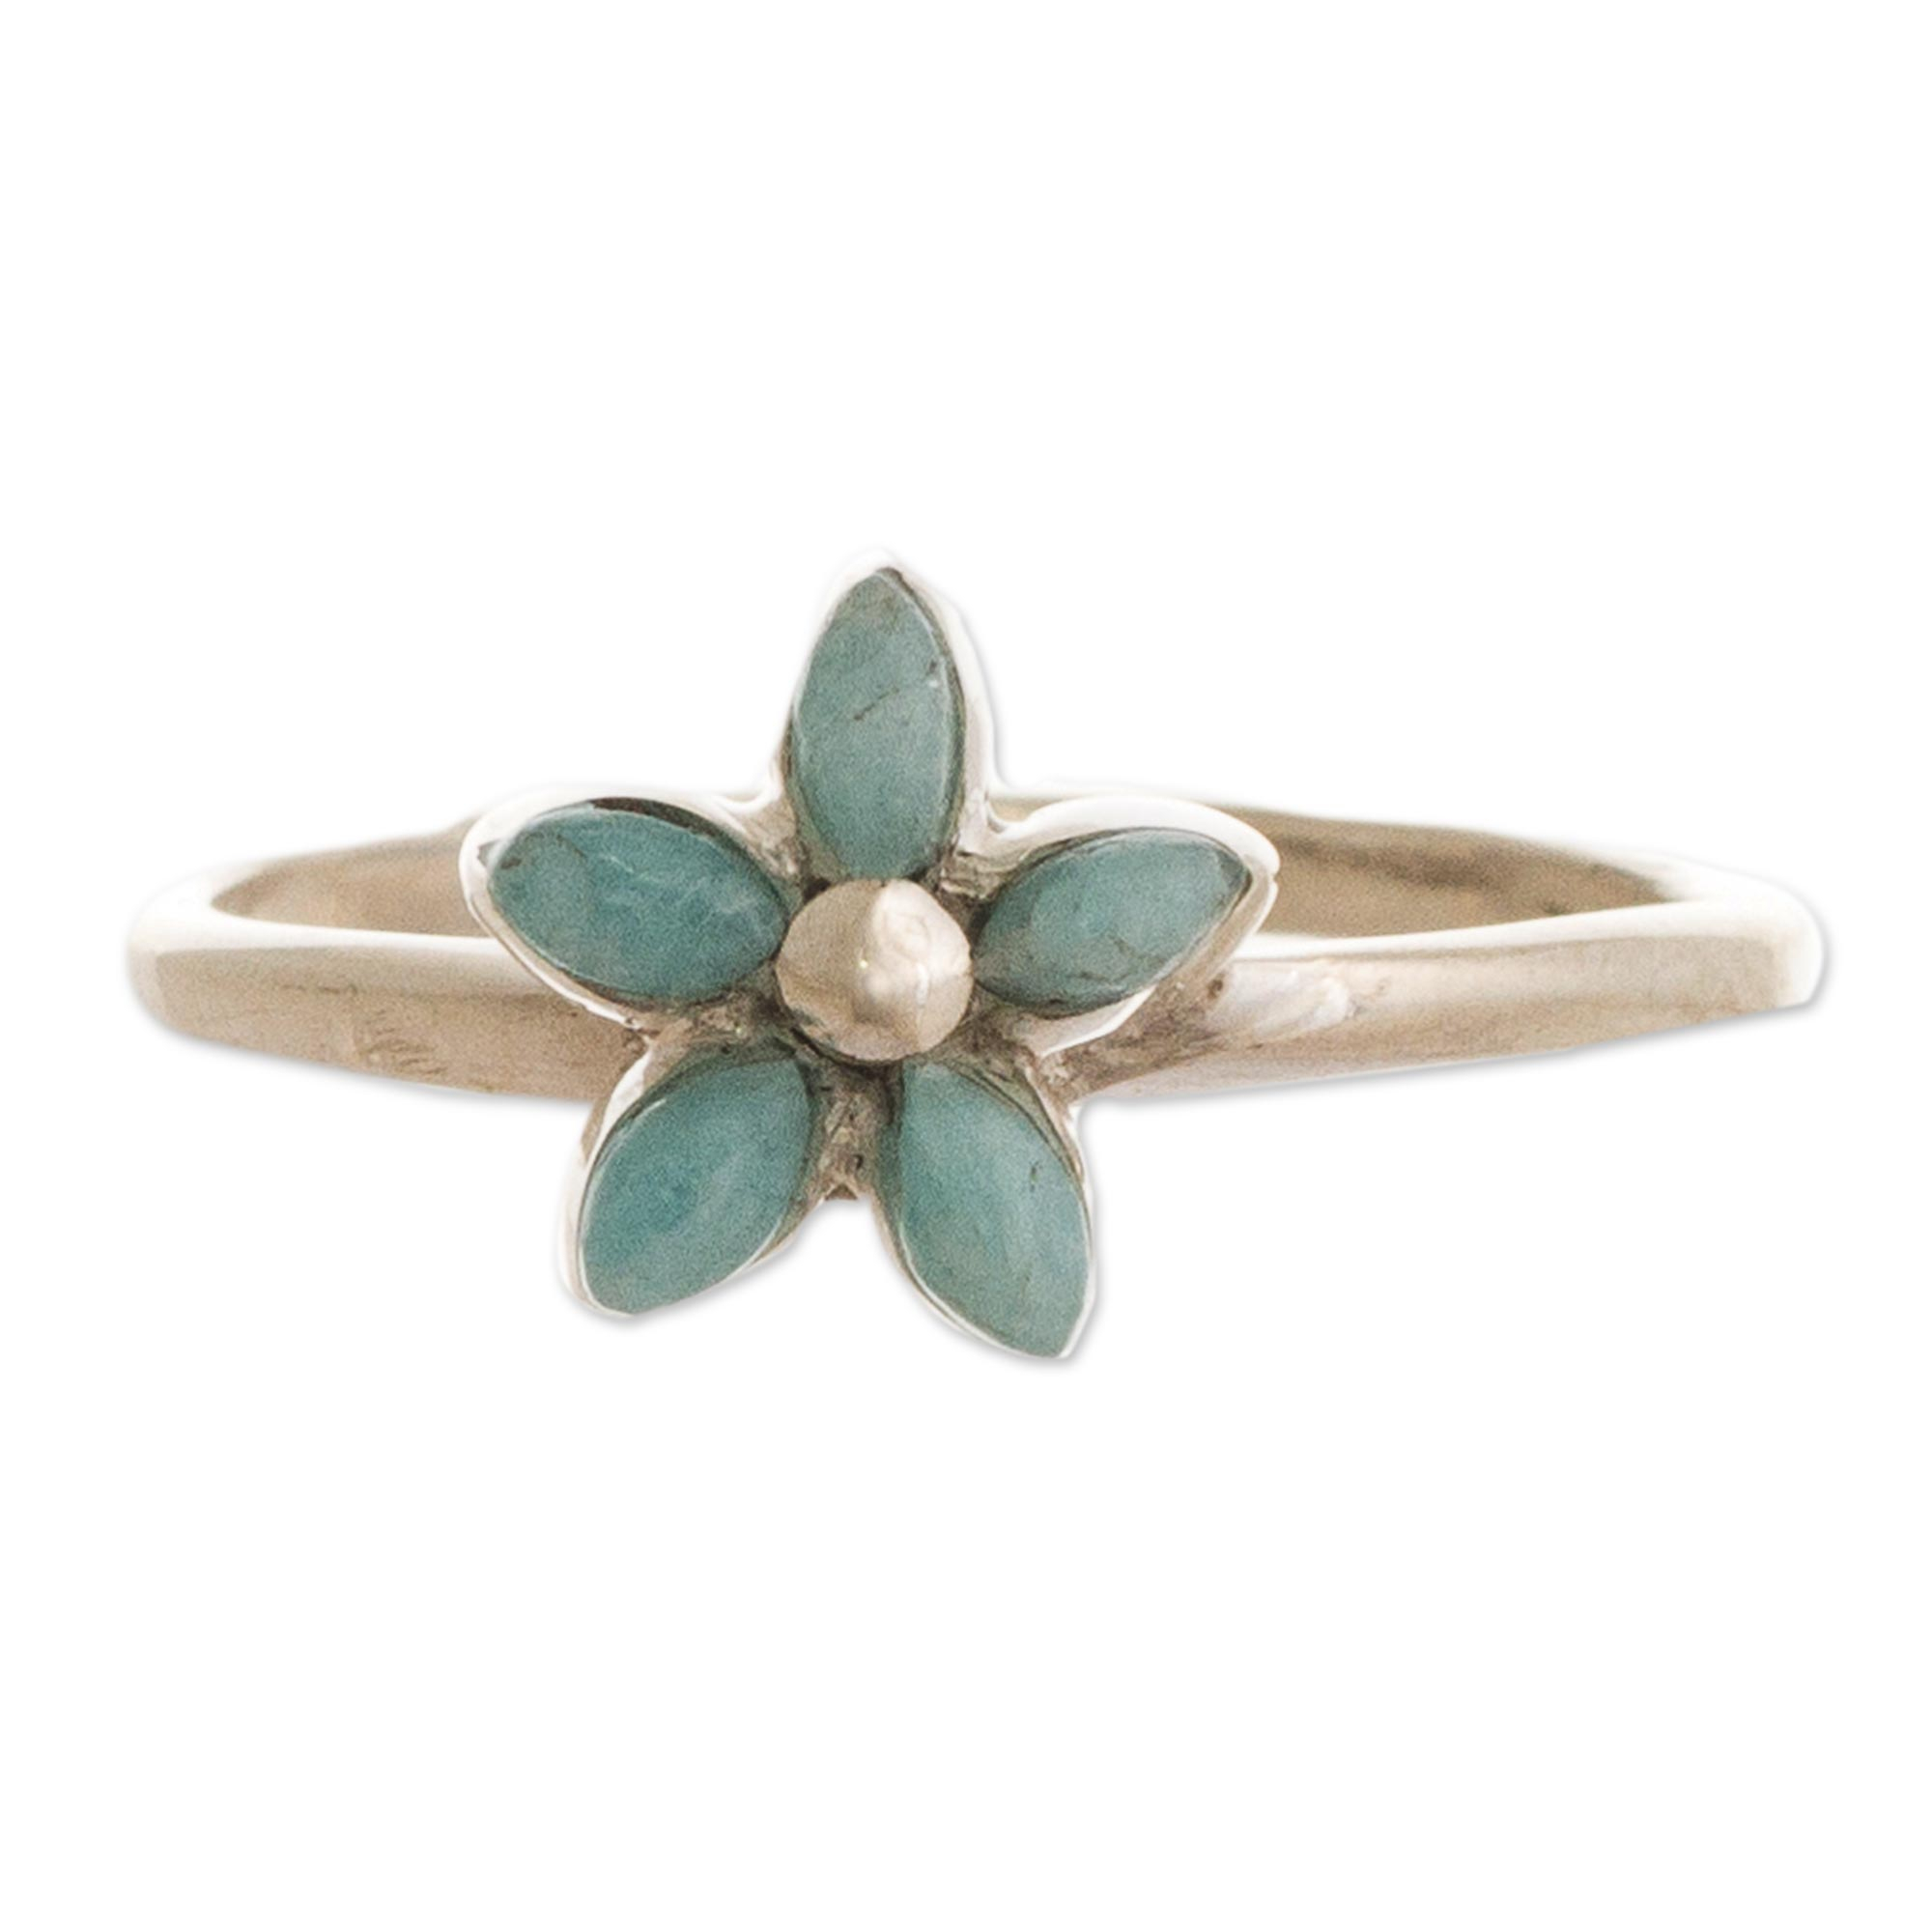 Star Blossom ring silver SALE